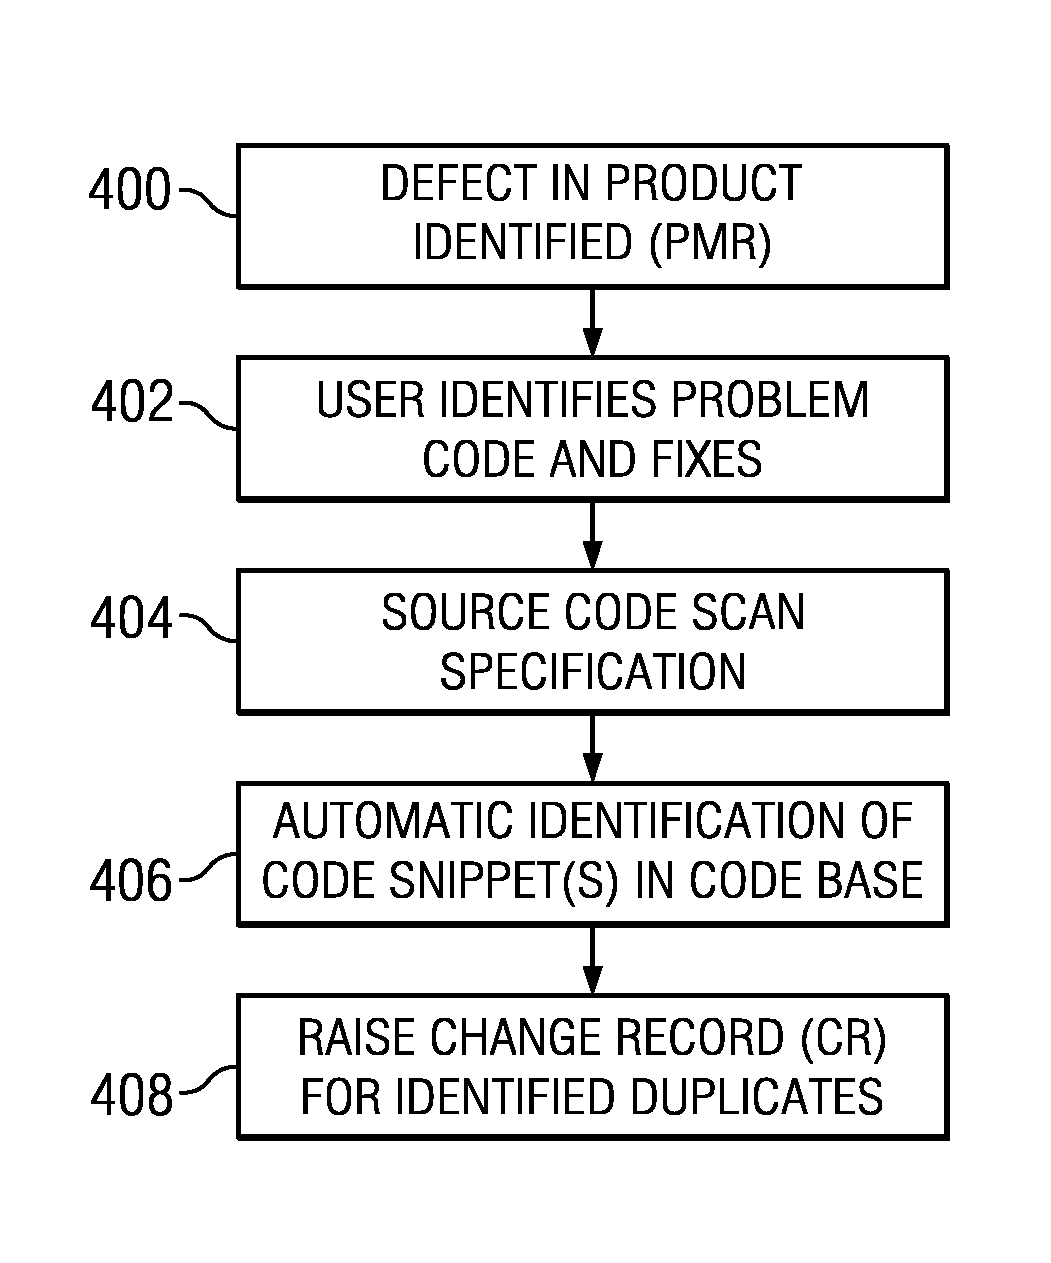 Automated tagging and tracking of defect codes based on customer problem management record